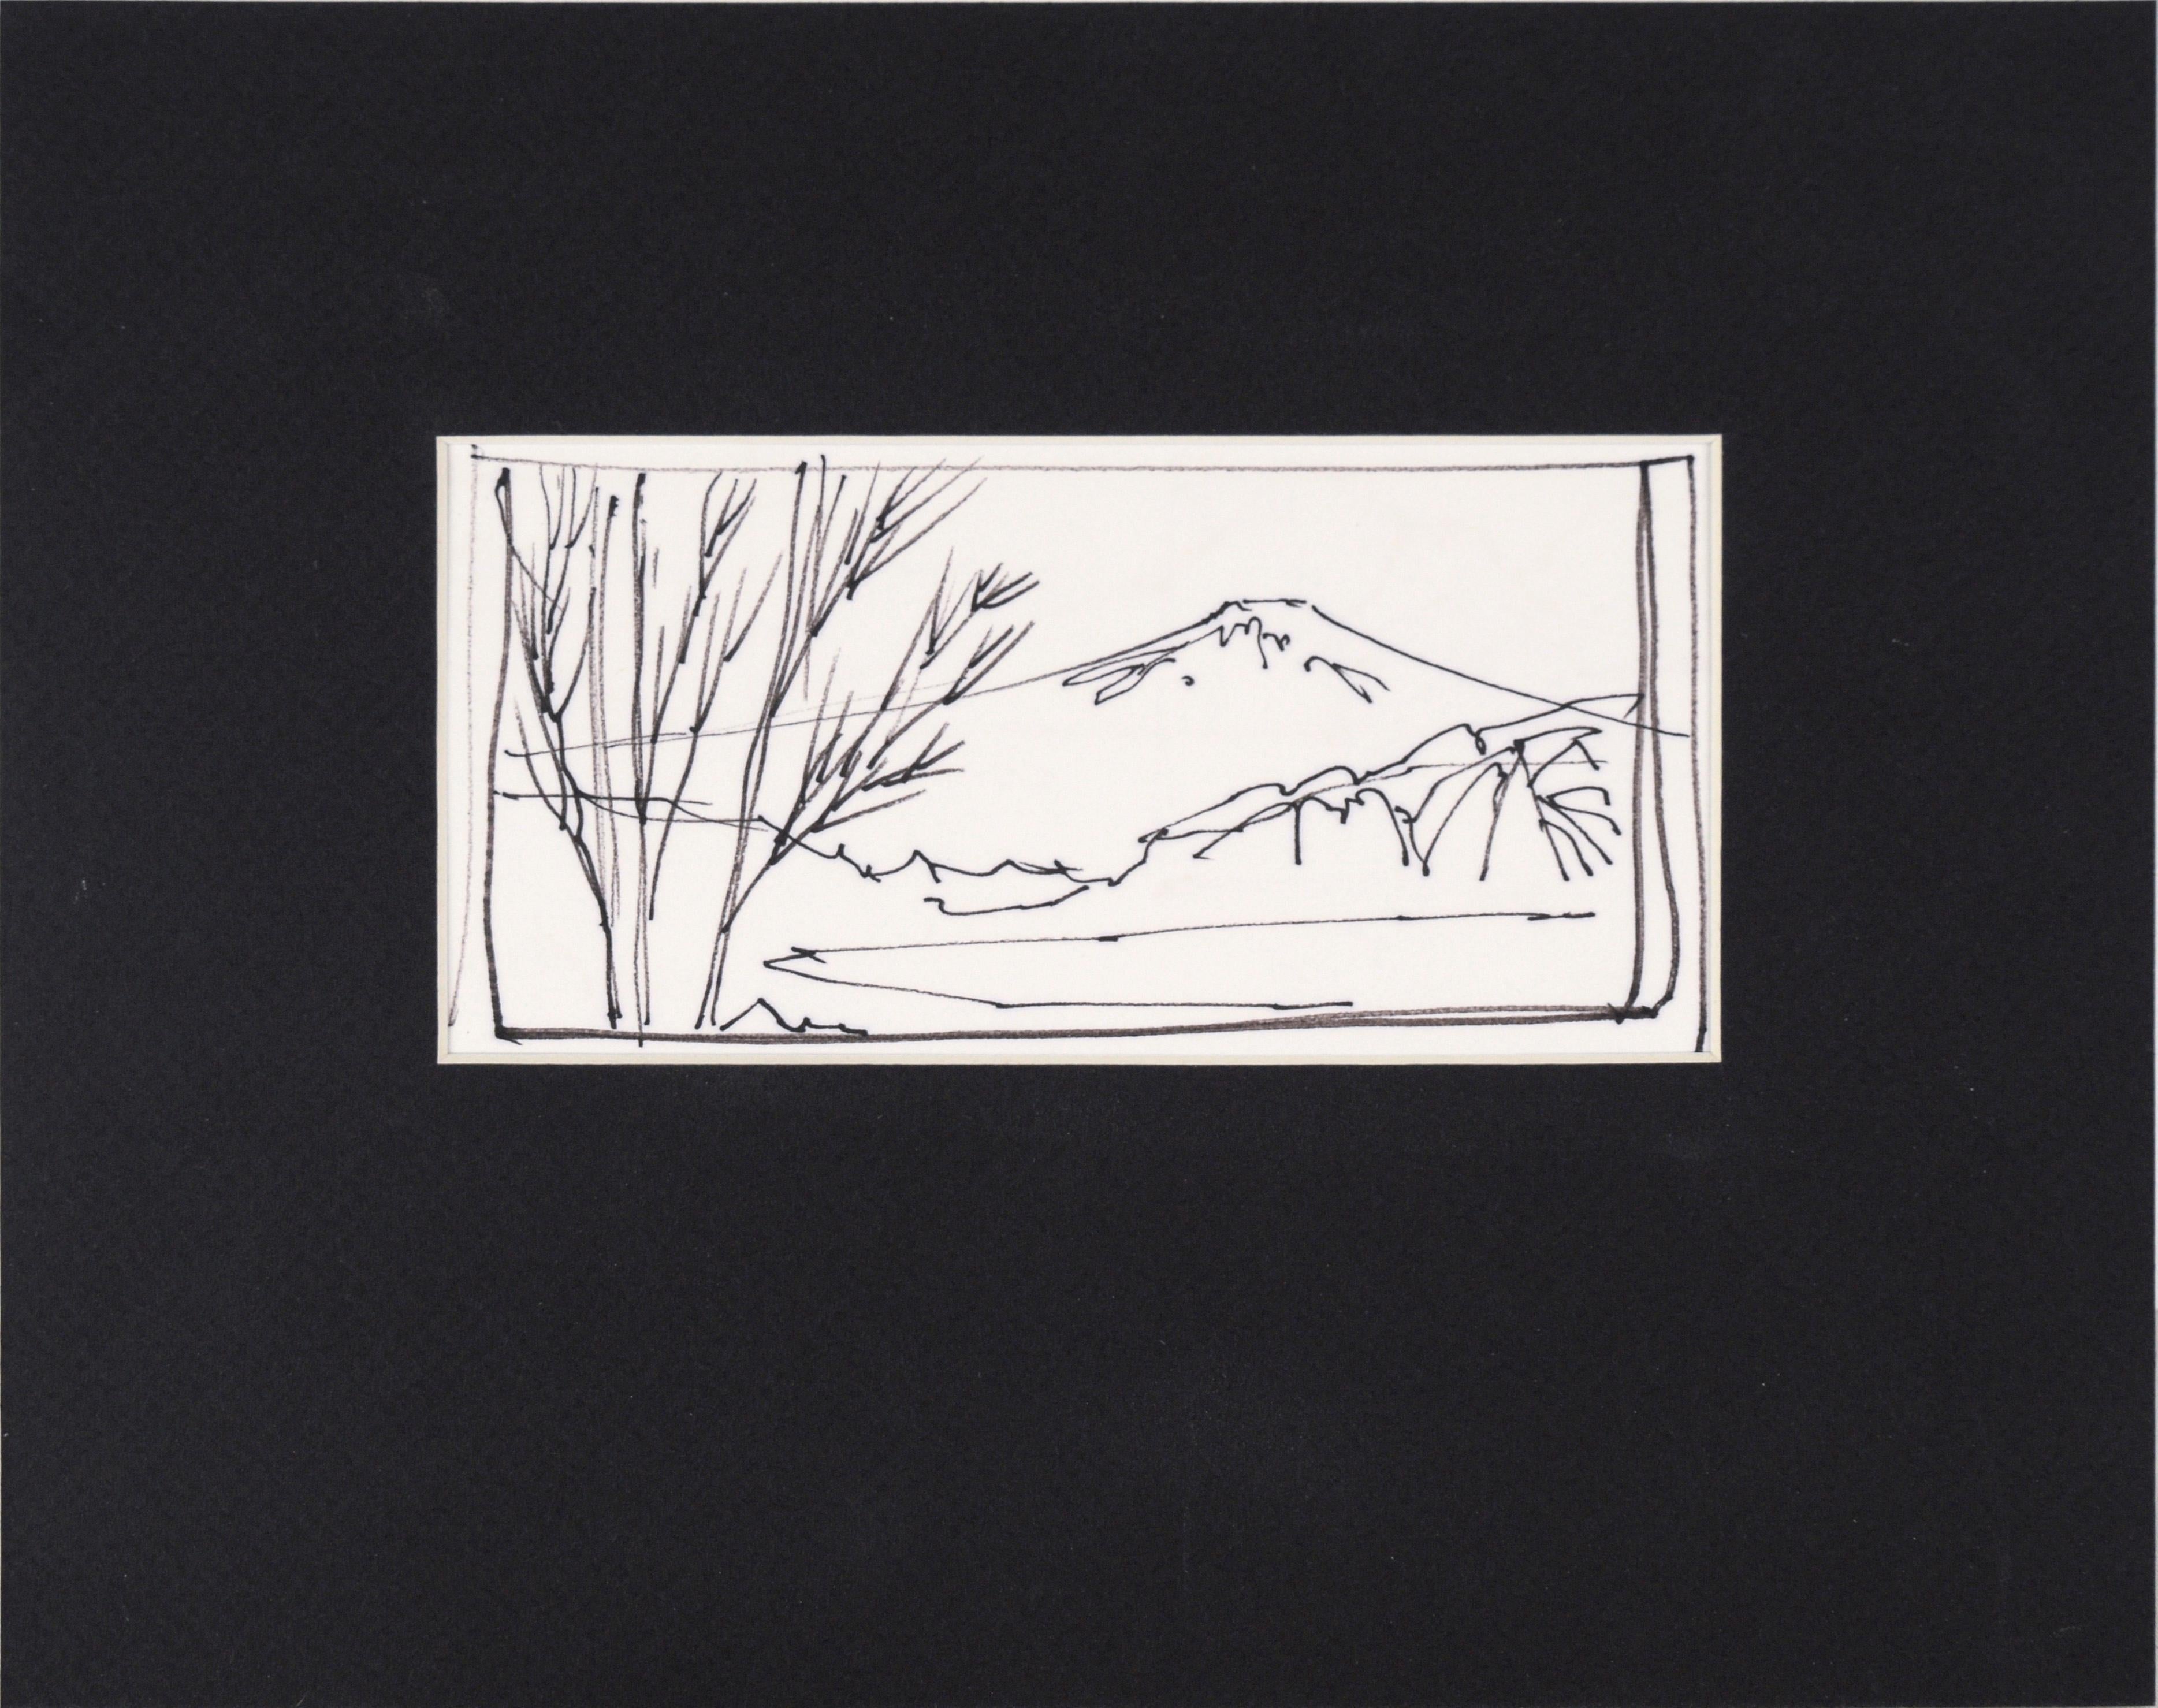 Laurence Sisson Landscape Art - Snow-Capped Mountain Lake - Line Drawing Landscape in Ink on Paper